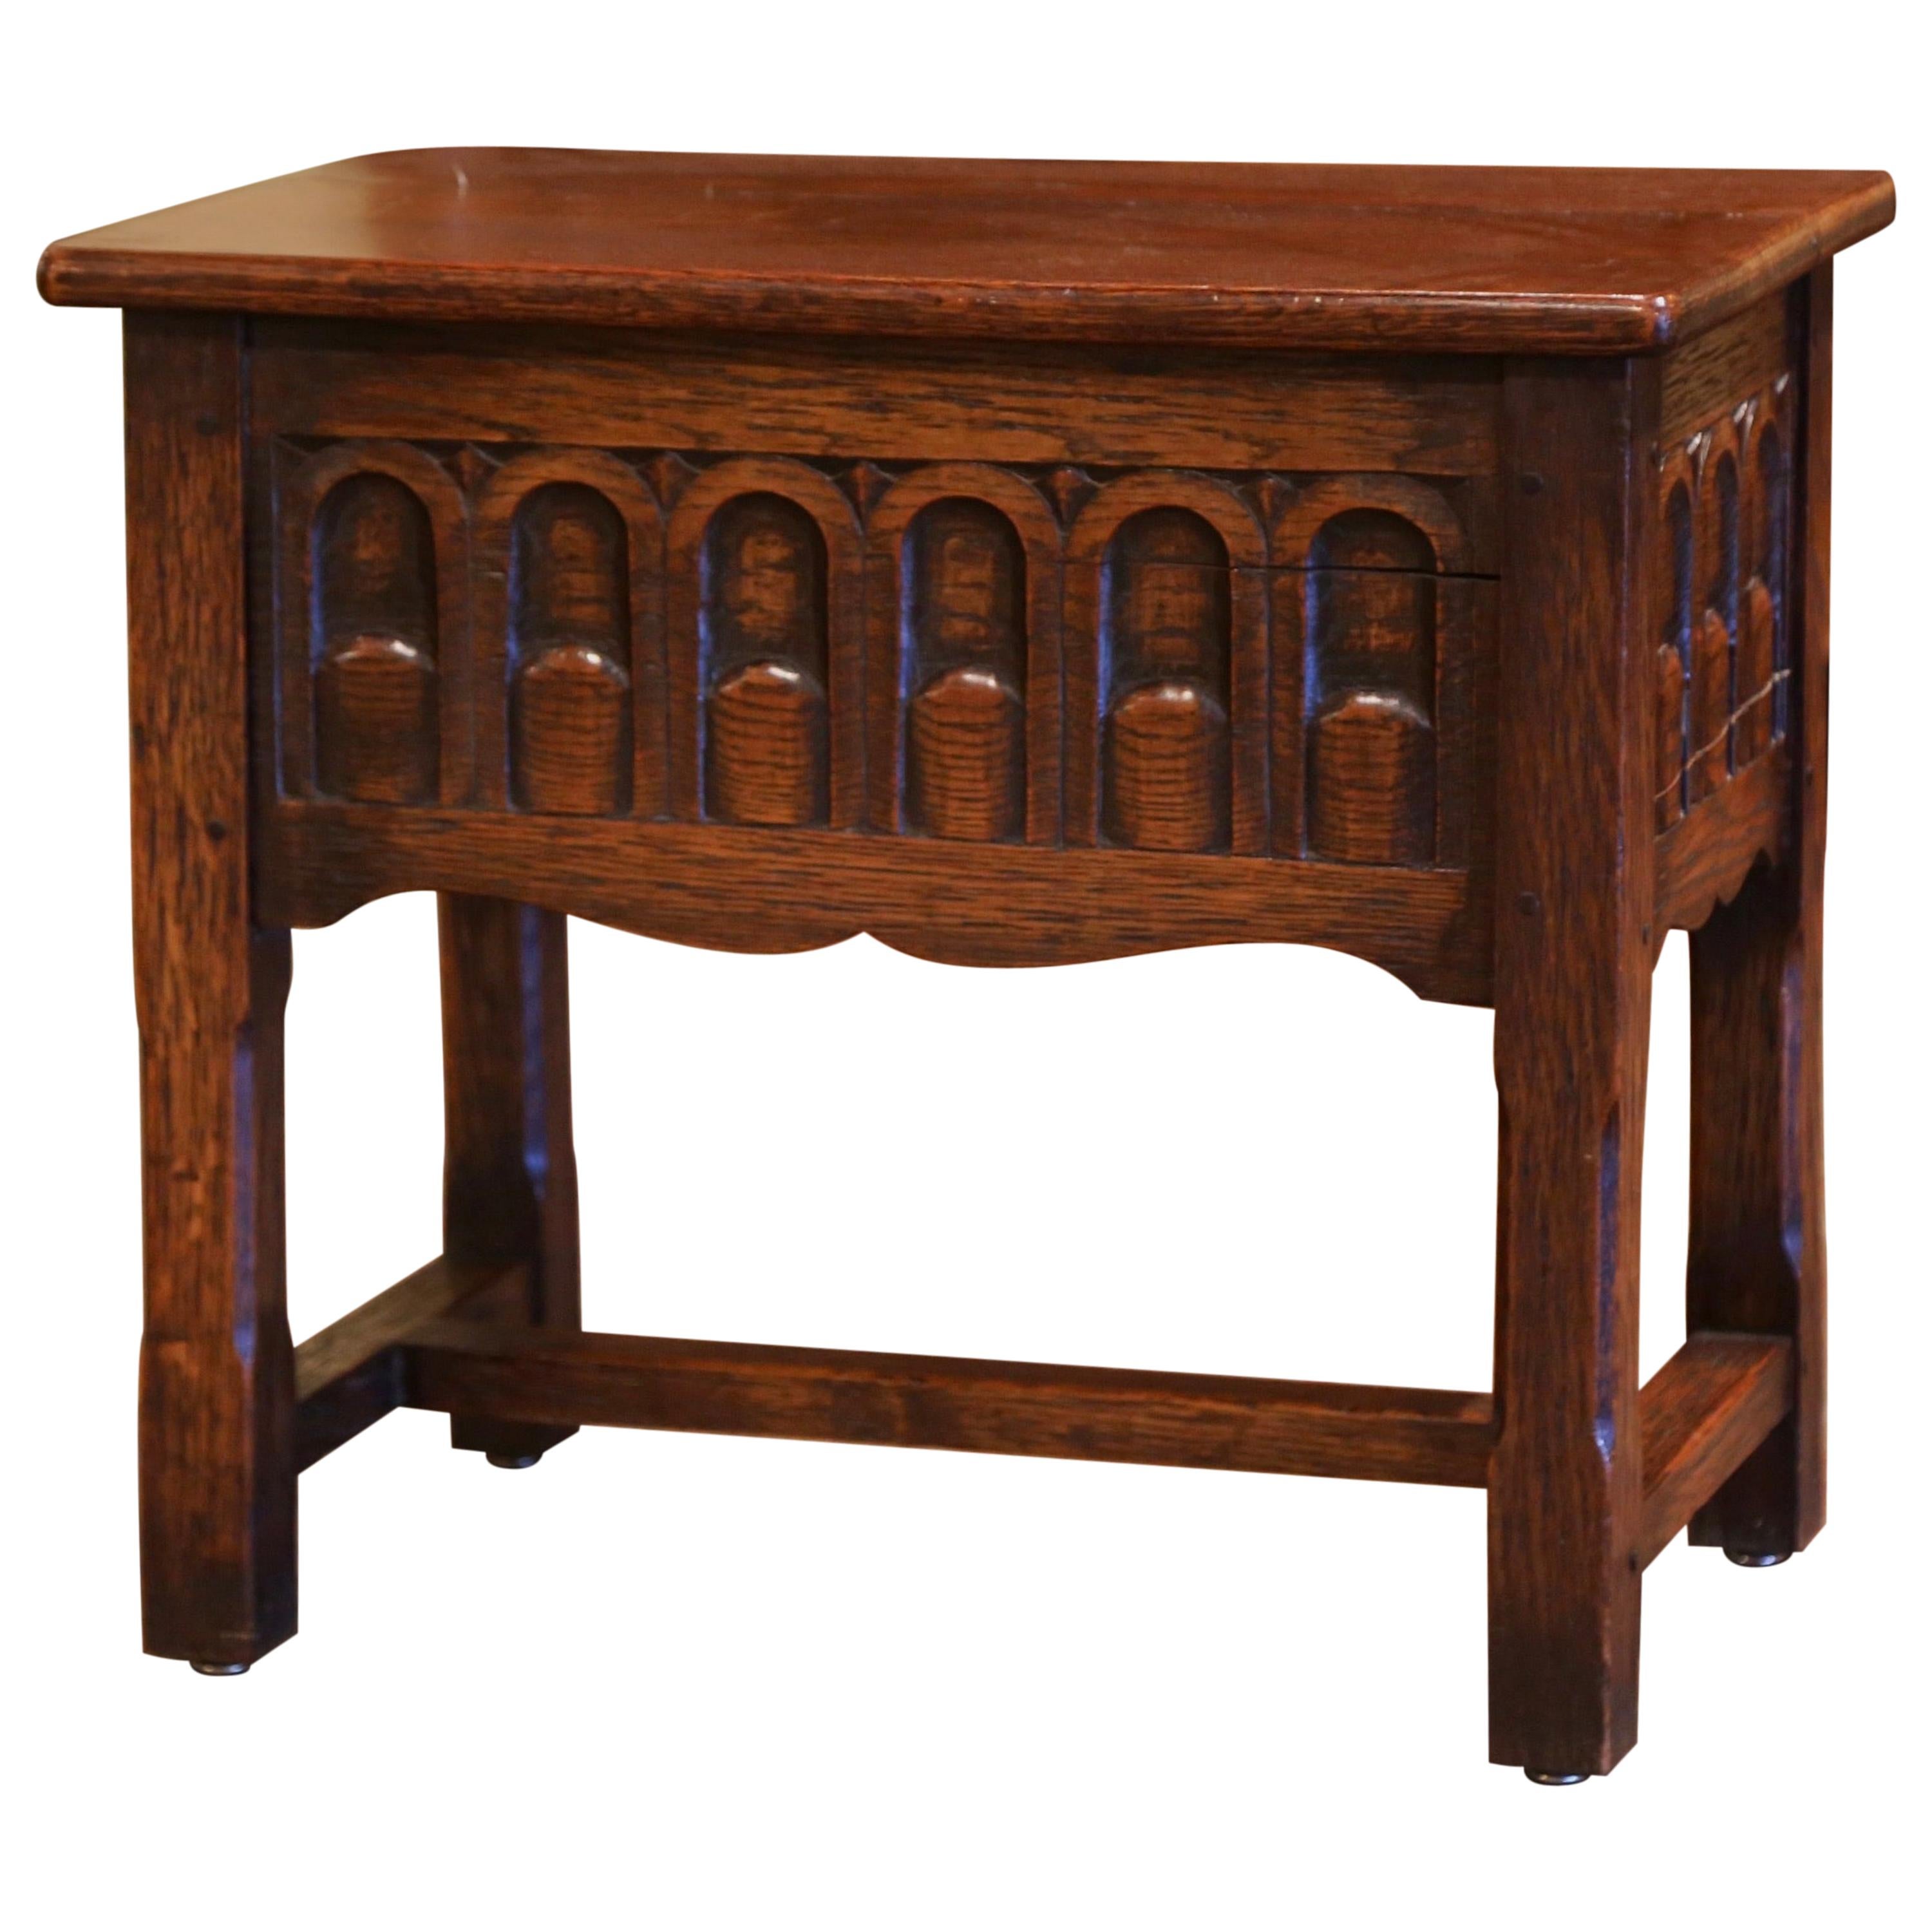 Early 20th Century French Louis XIV Carved Oak Side Table, Coffer Storage Bench